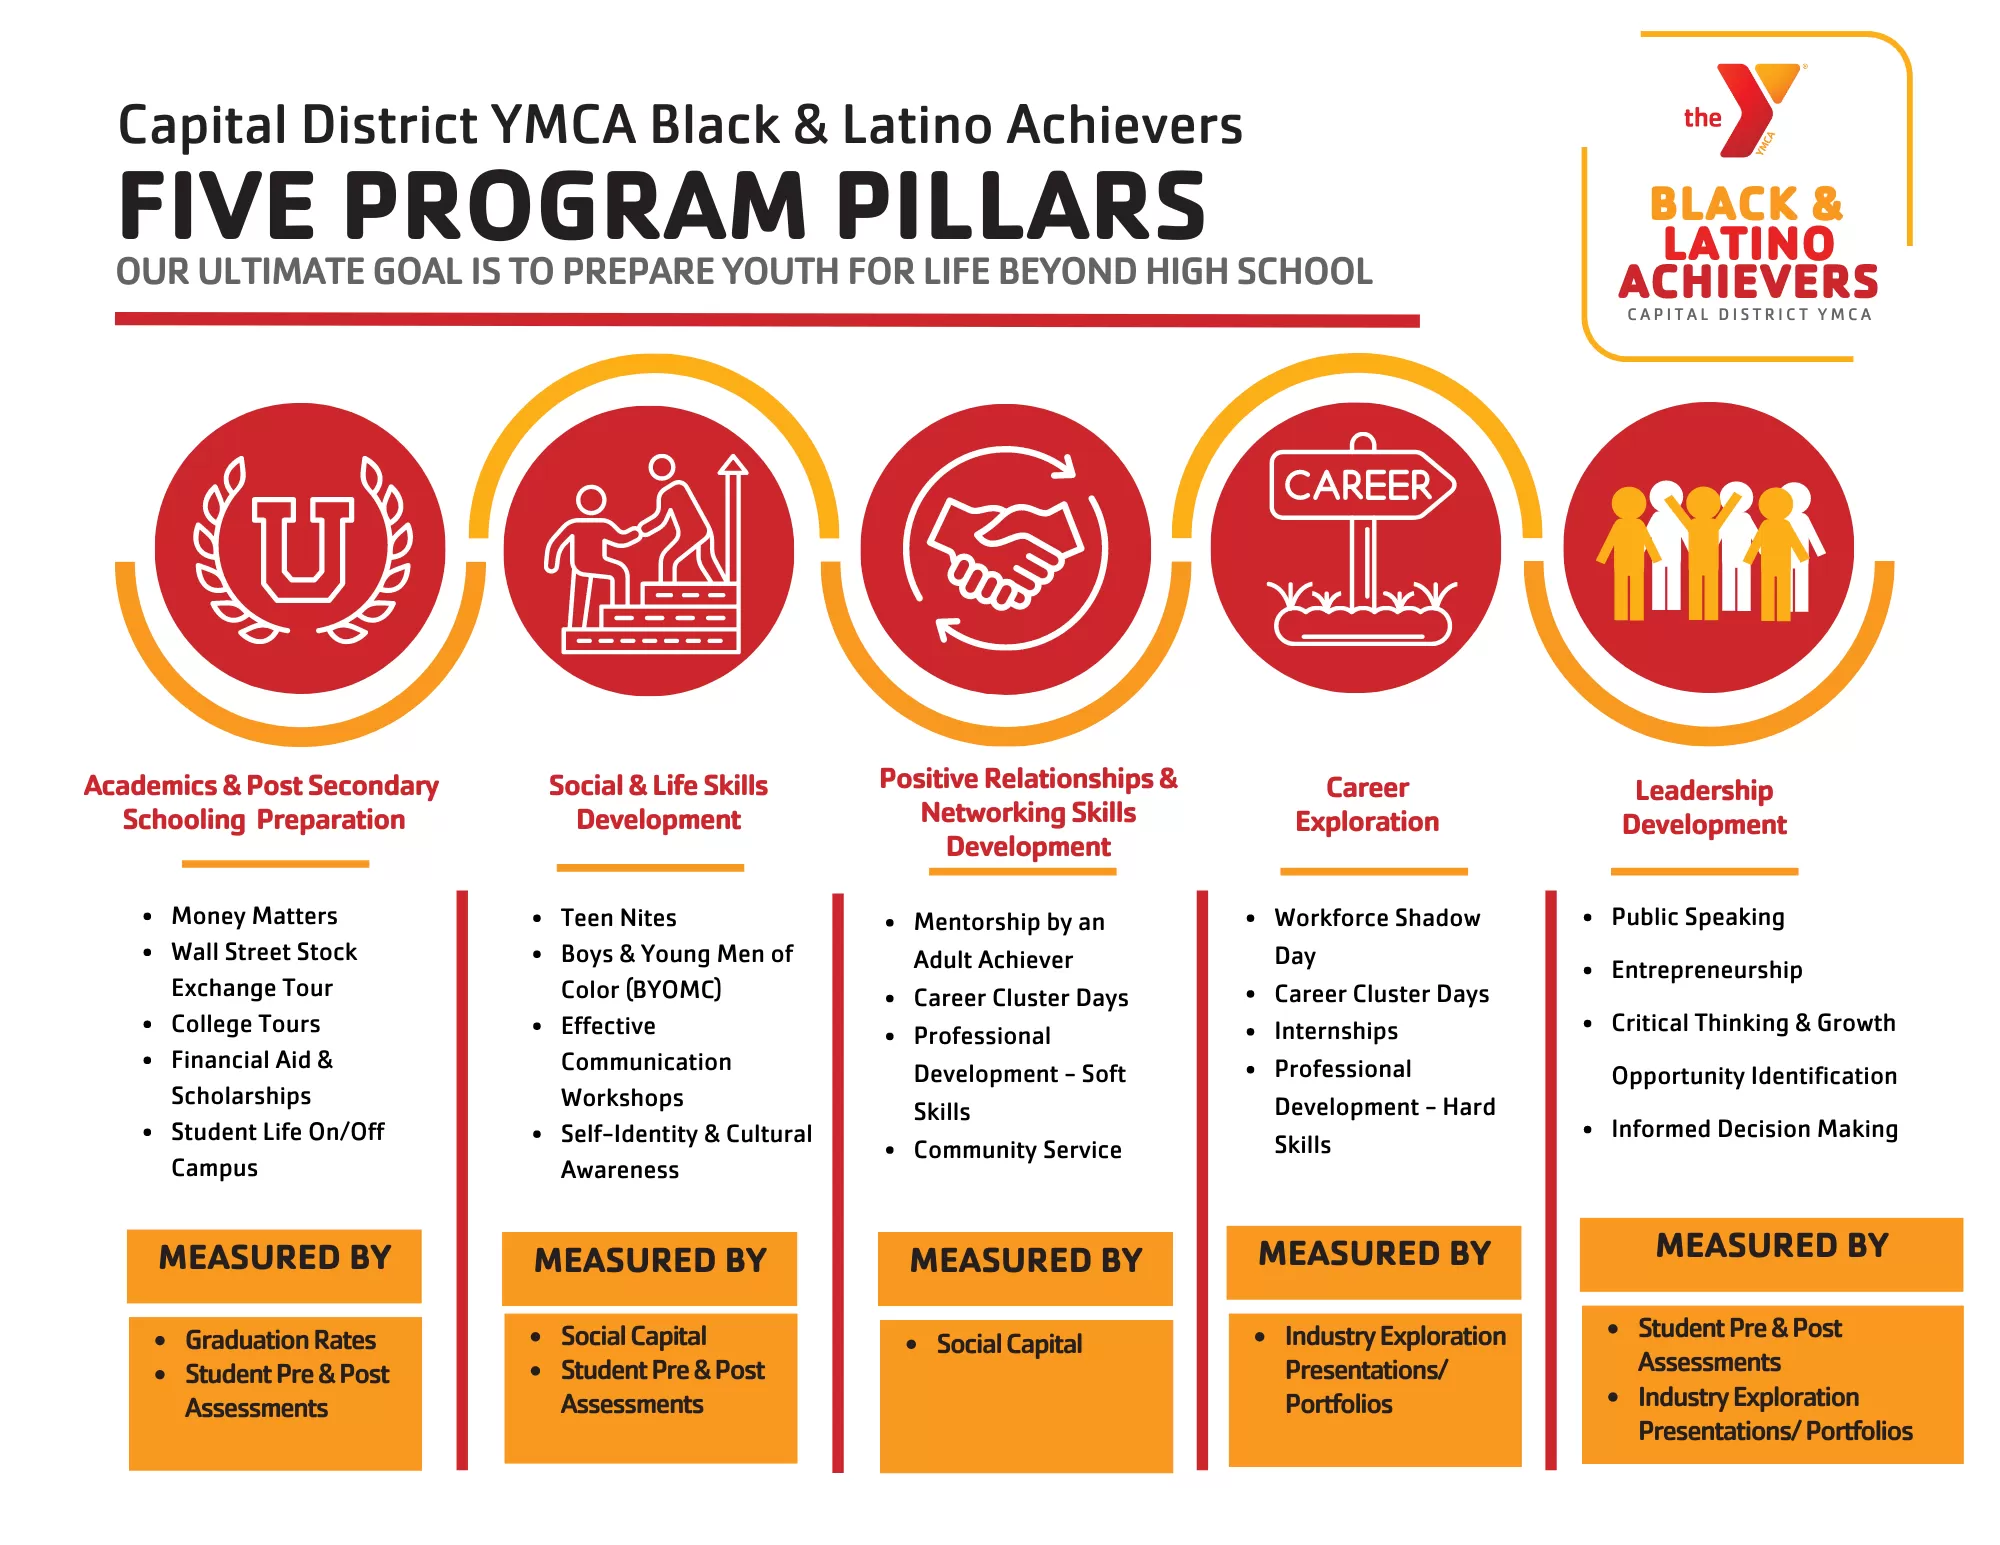 The five pillars to the Black and Latino Achievers program